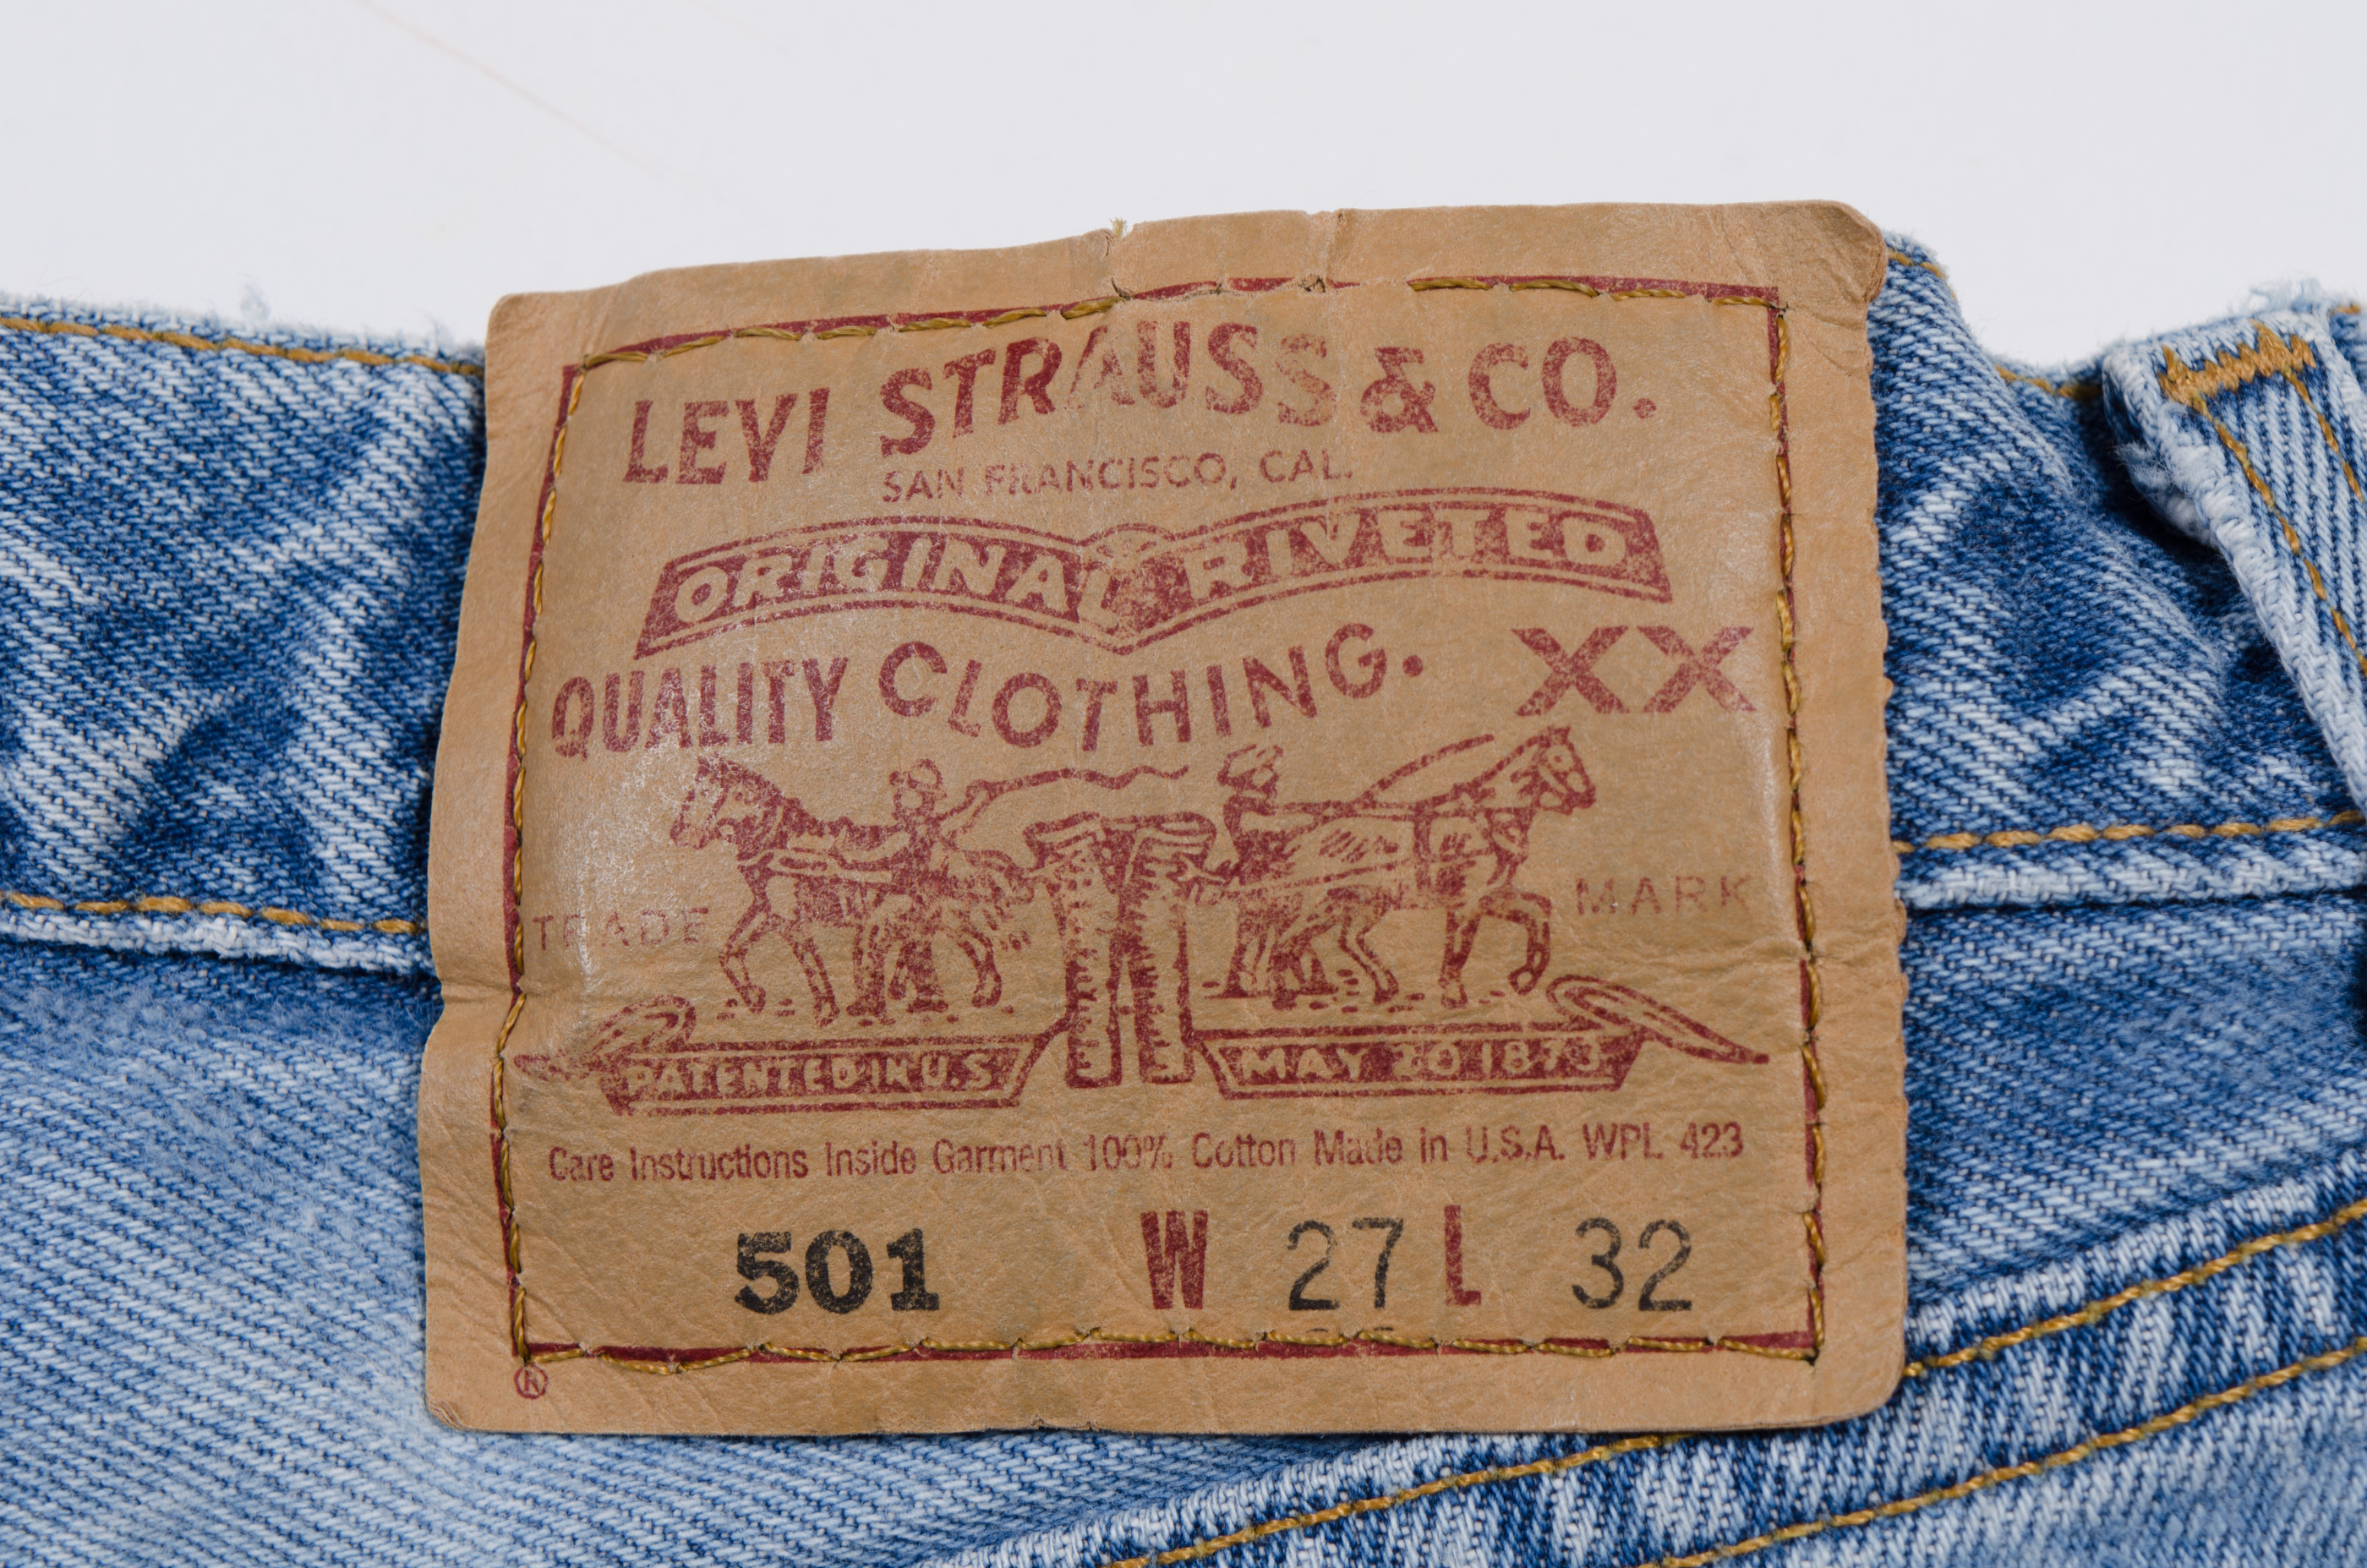 levi strauss and levis